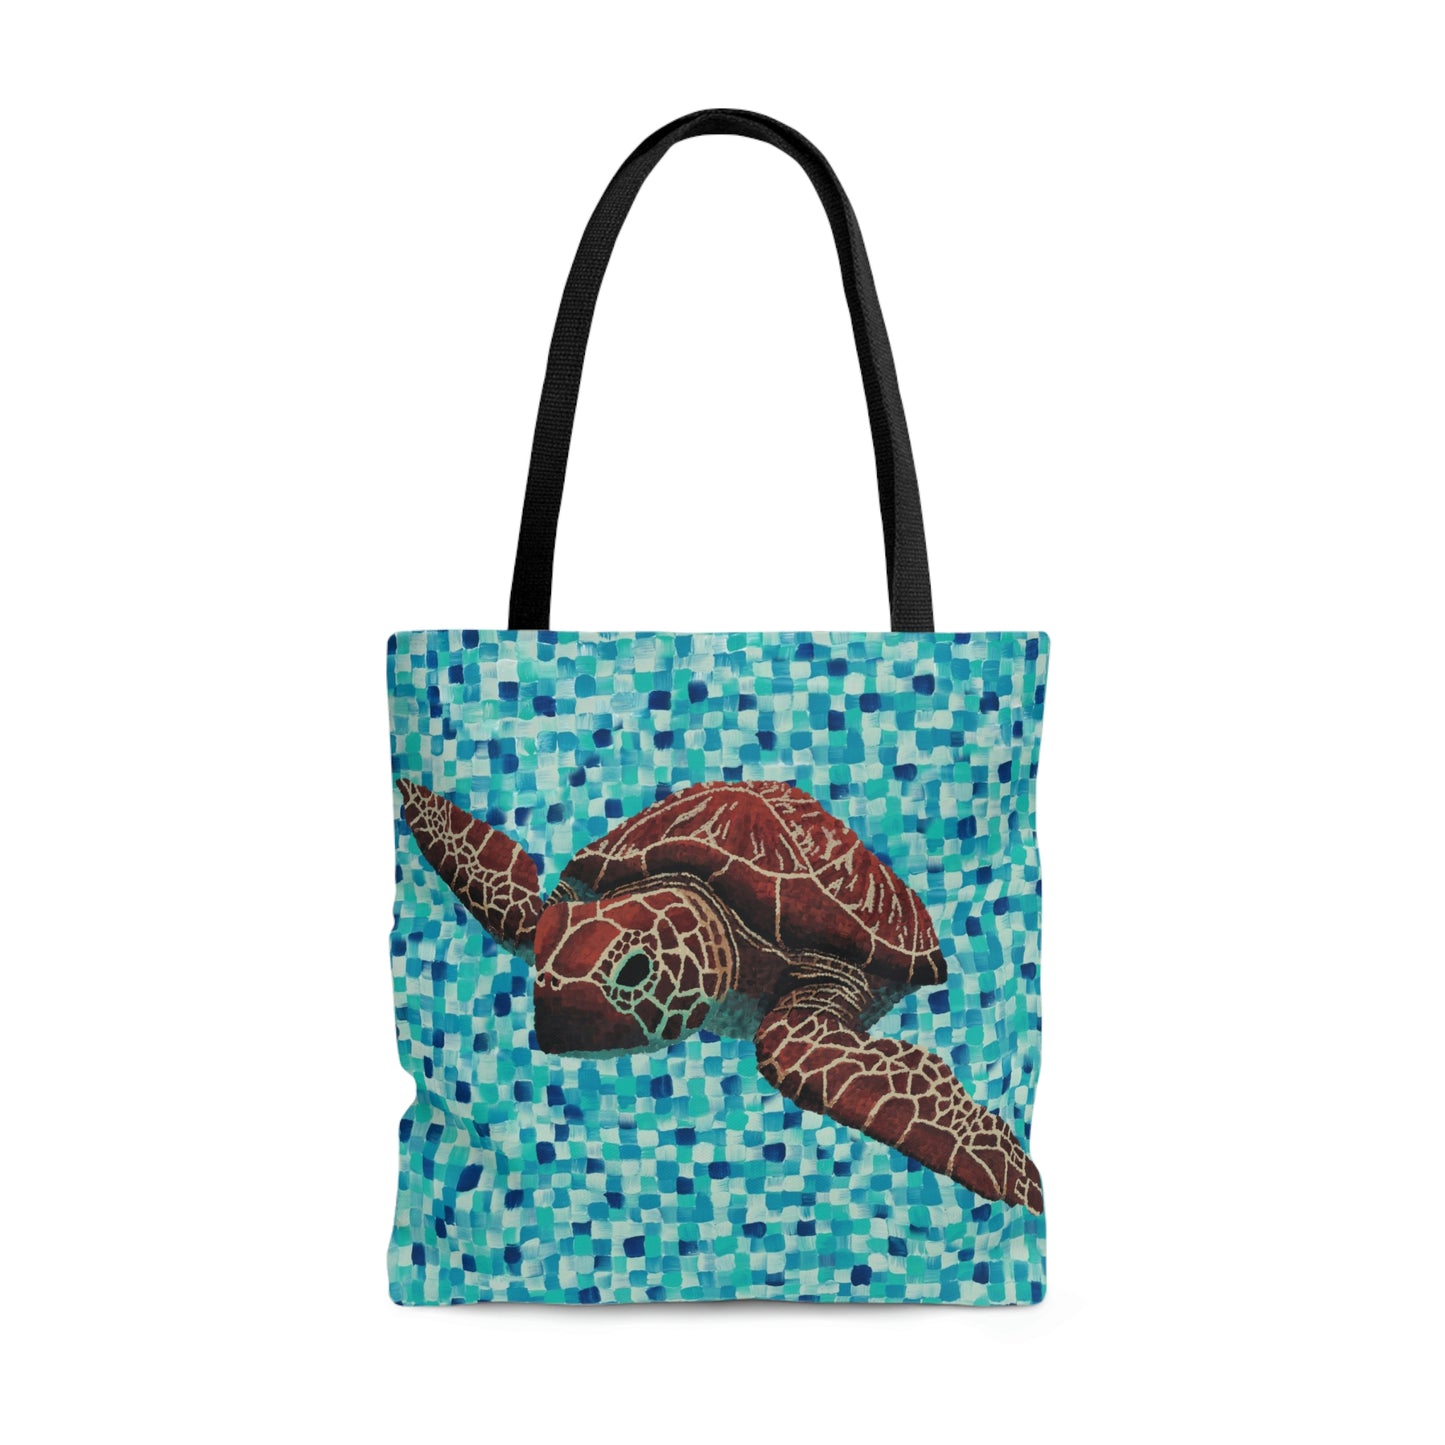 Sea Turtle 1 Tote Bag with all-over print, boxed corners, and black handles. Made of durable 100% polyester for beach or town.